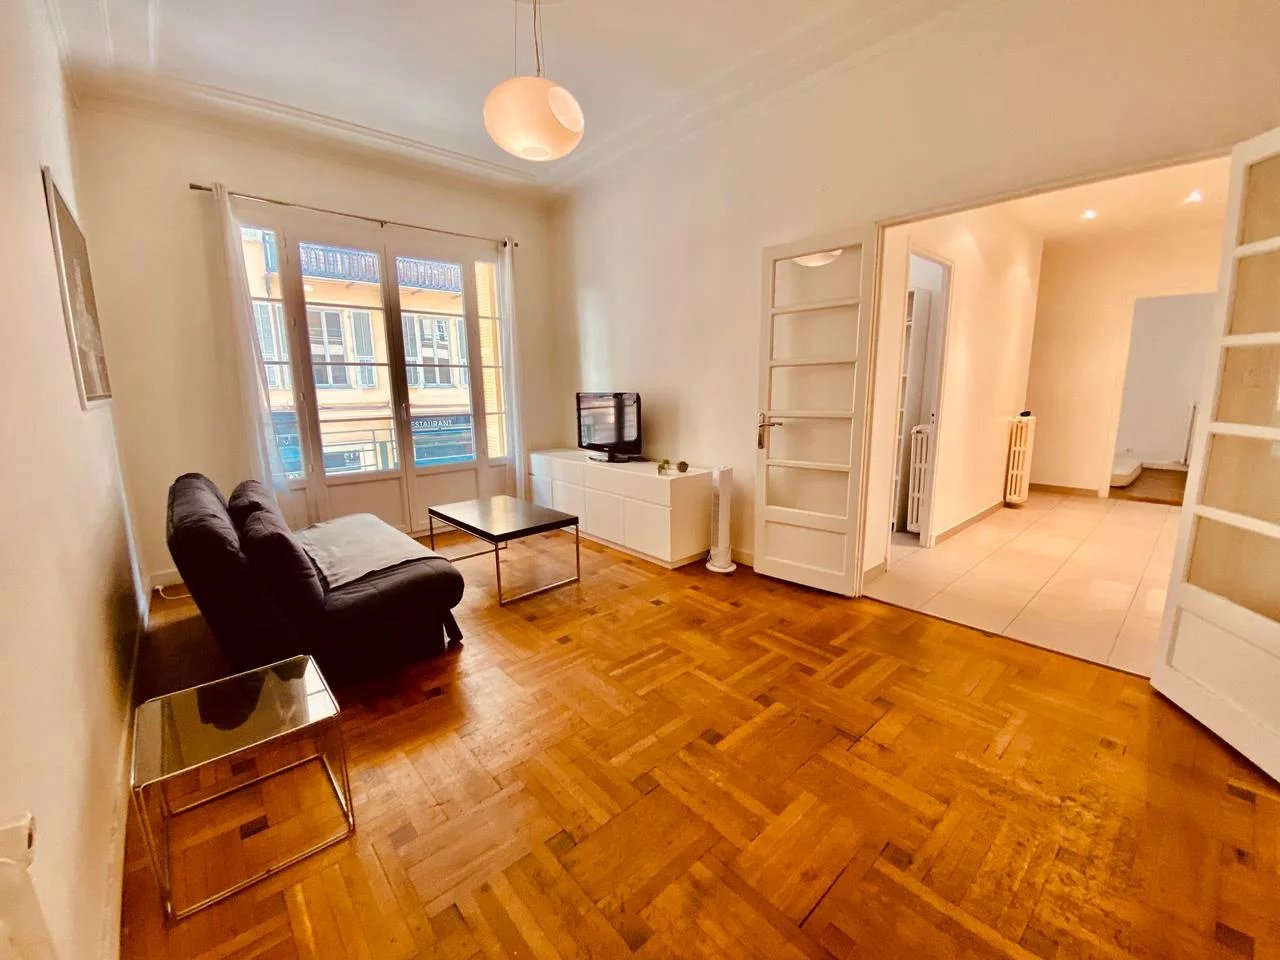 Appartement  2 Rooms 53m2  for sale   329 000 €